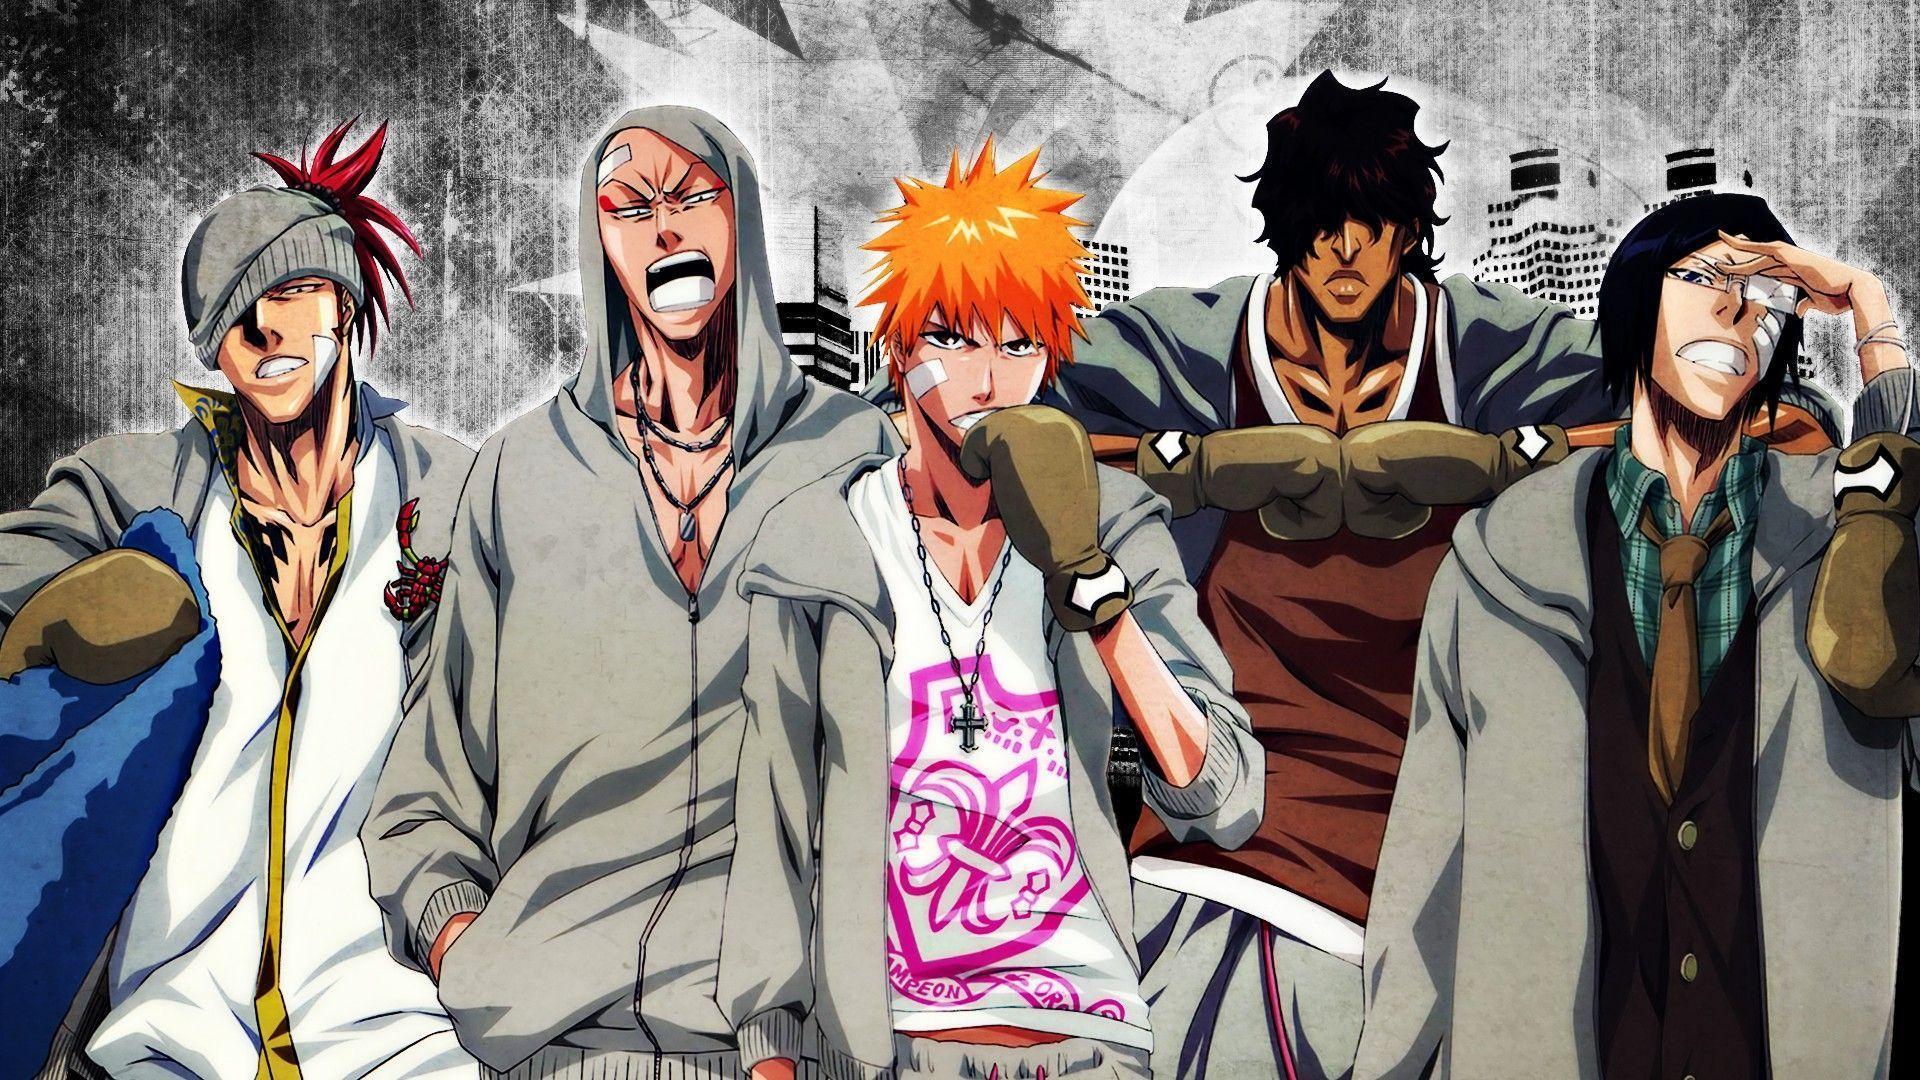 Pic. #Wallpaper #Wide #Bleach #Anime, 185891B – Unique HD Wallpapers